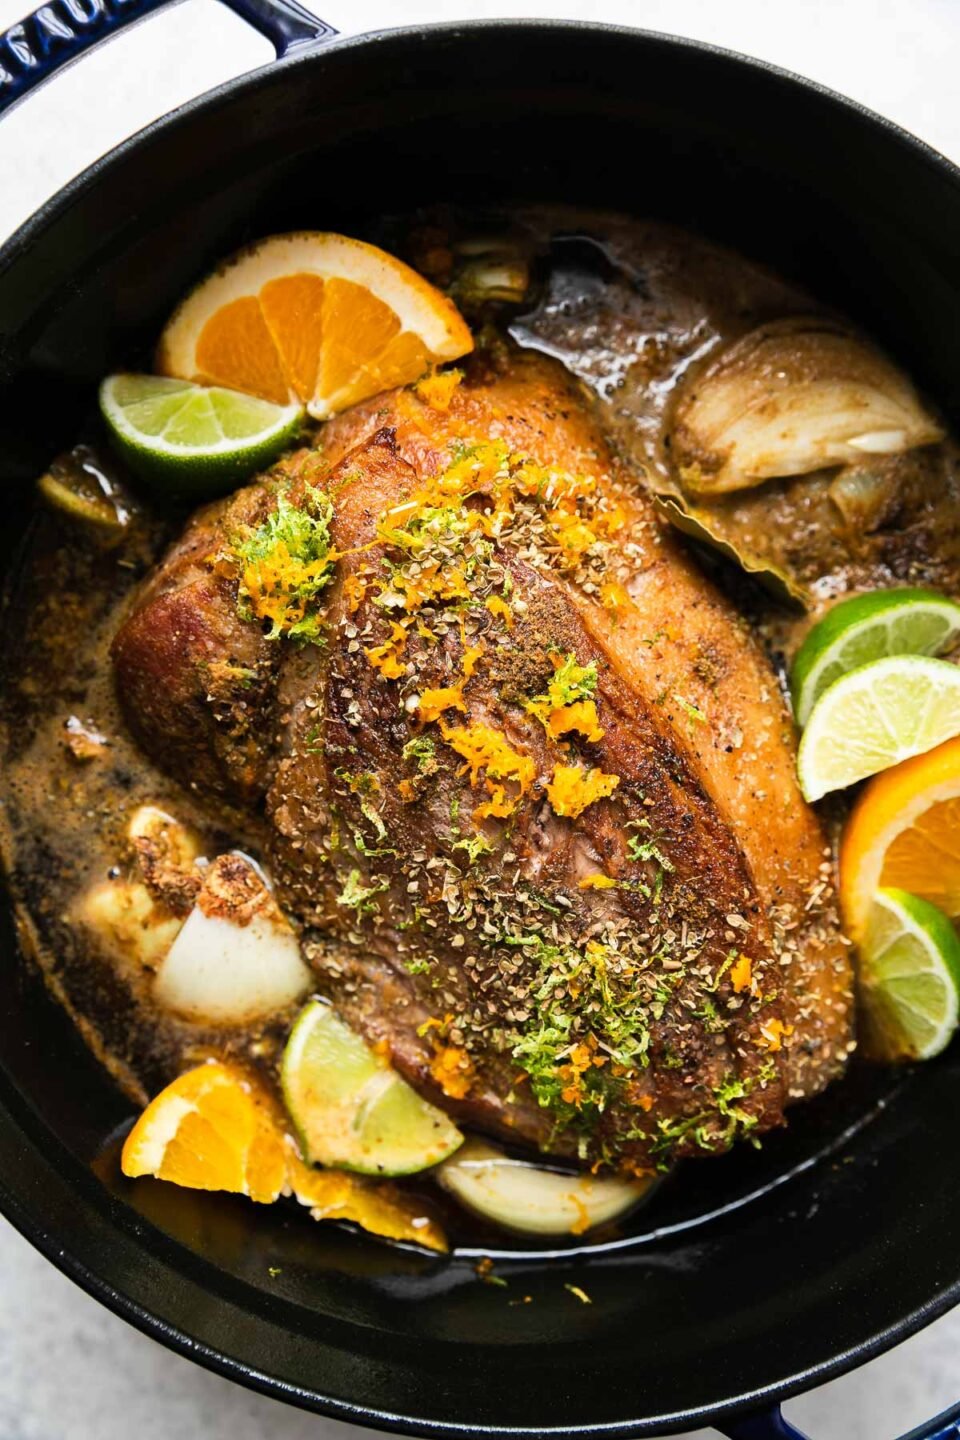 An overhead shot of how to make Dutch oven carnitas, step 3: Assemble the braise. A browned boneless pork shoulder sits inside of a dark navy Staub dutch oven for Dutch oven carnitas. The pork shoulder is surrounded by onions & fresh citrus and rests inside of a braising liquid of light beer. Orange zest, lime zest, ground cumin, dried oregano, & bay leaf have been sprinkled over top. The pot sits atop a creamy white textured surface.